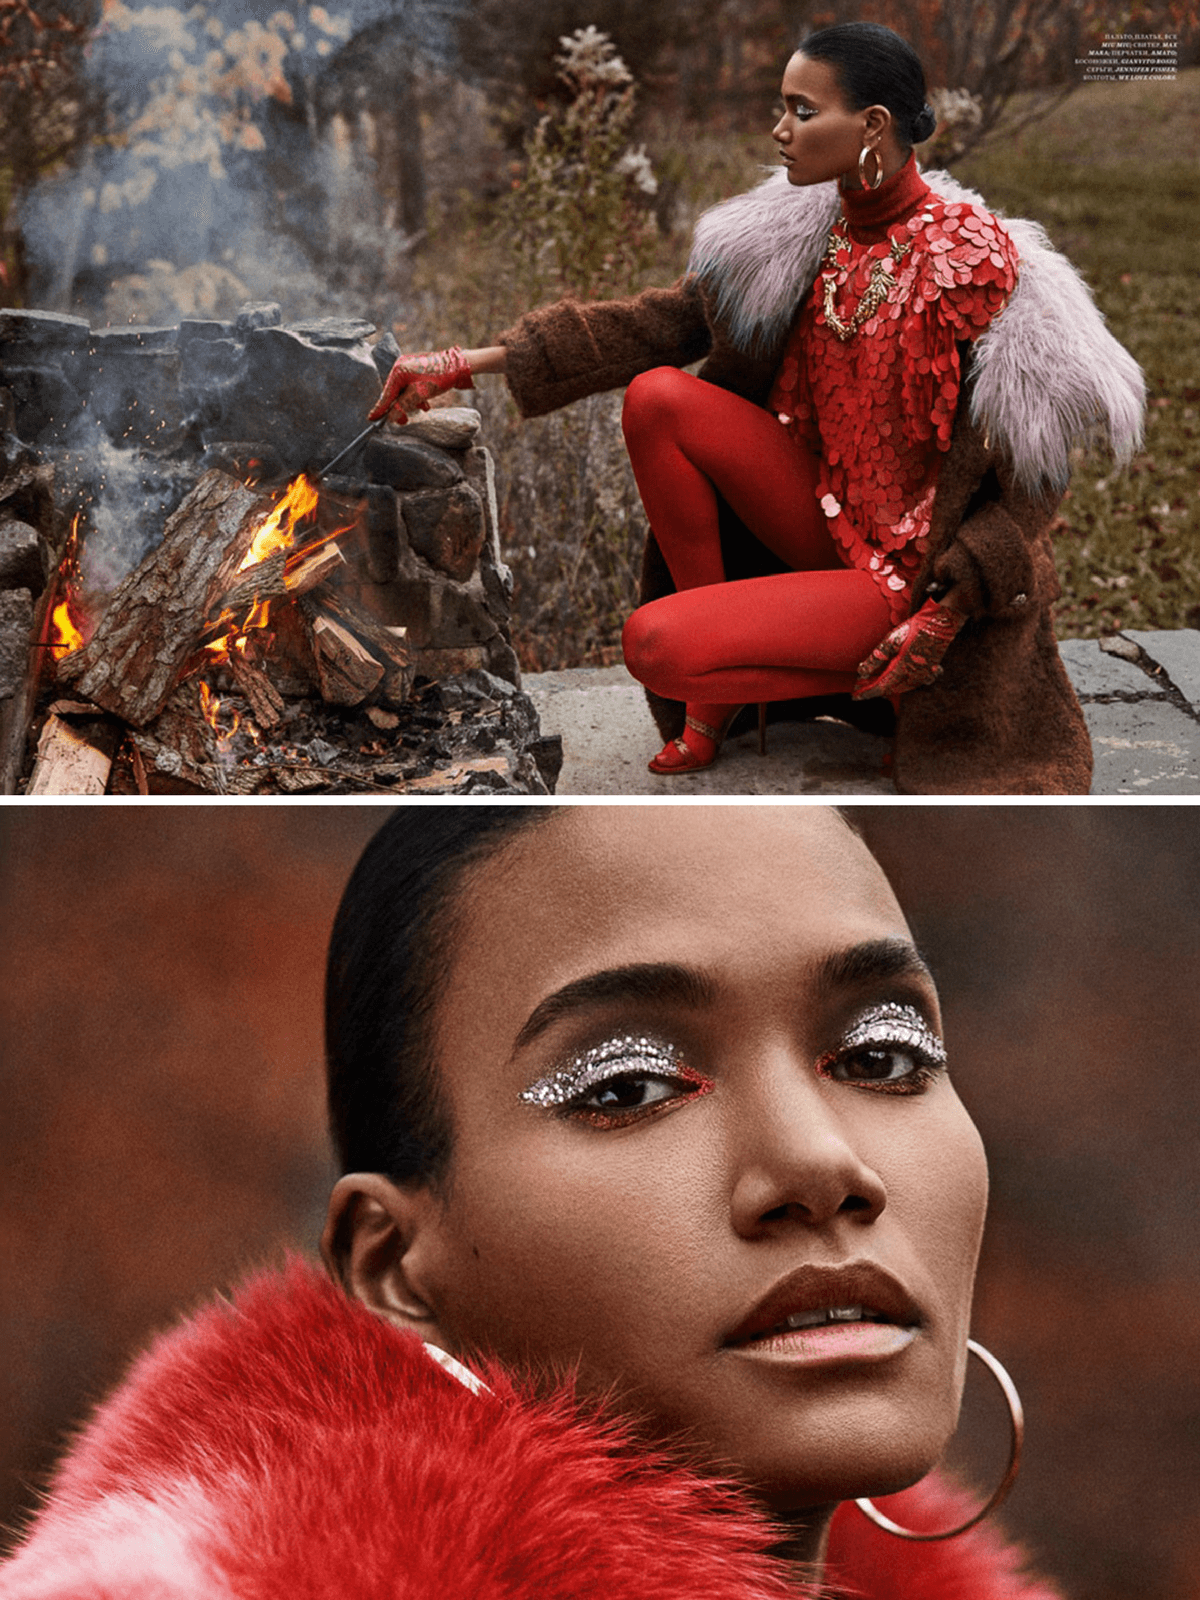 woman in red outfit by fire and close up of woman in red fur lined coat